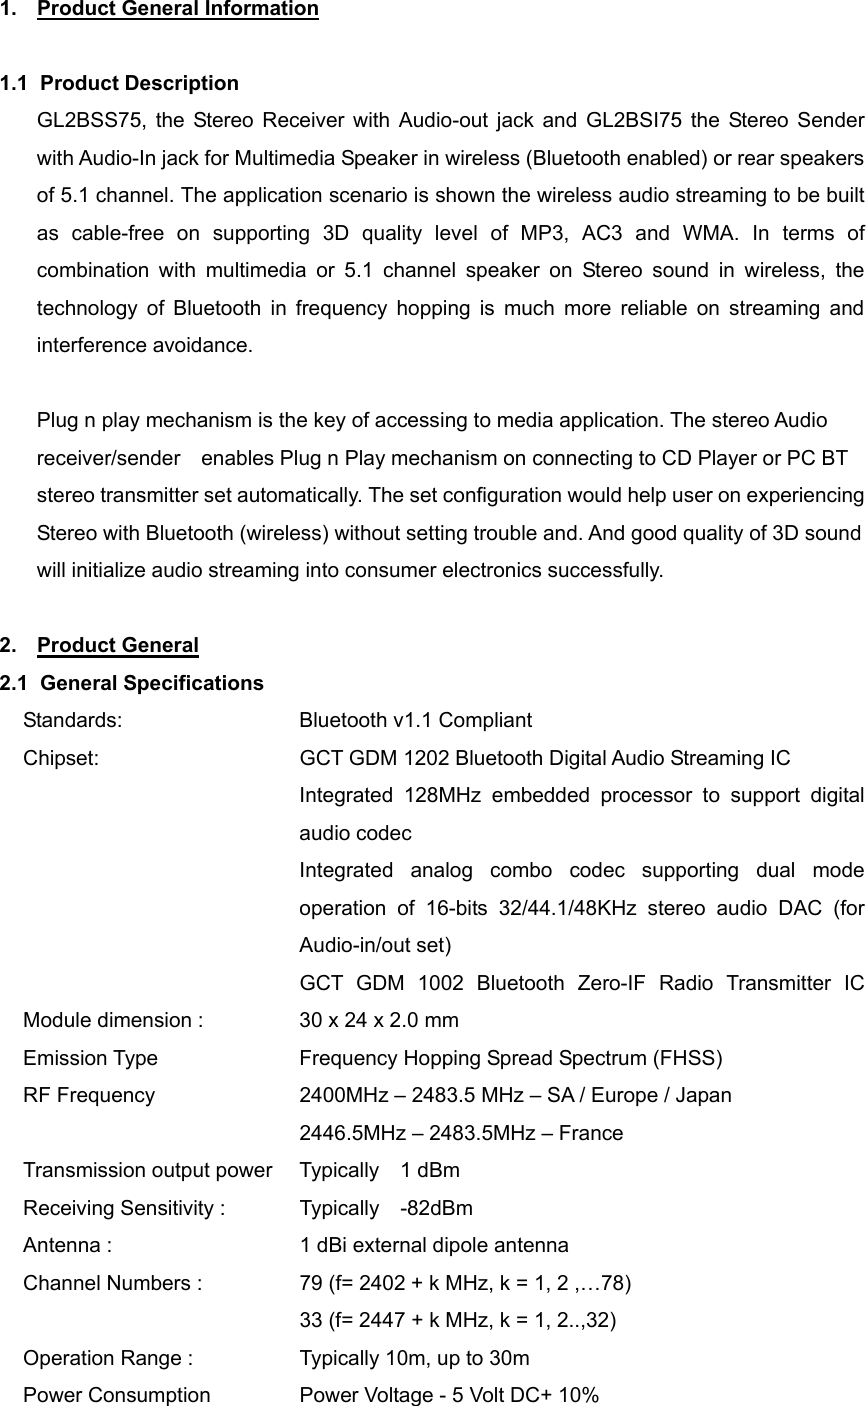 1.  Product General Information  1.1 Product Description GL2BSS75, the Stereo Receiver with Audio-out jack and GL2BSI75 the Stereo Sender with Audio-In jack for Multimedia Speaker in wireless (Bluetooth enabled) or rear speakers of 5.1 channel. The application scenario is shown the wireless audio streaming to be built as cable-free on supporting 3D quality level of MP3, AC3 and WMA. In terms of combination with multimedia or 5.1 channel speaker on Stereo sound in wireless, the technology of Bluetooth in frequency hopping is much more reliable on streaming and interference avoidance.    Plug n play mechanism is the key of accessing to media application. The stereo Audio receiver/sender    enables Plug n Play mechanism on connecting to CD Player or PC BT stereo transmitter set automatically. The set configuration would help user on experiencing Stereo with Bluetooth (wireless) without setting trouble and. And good quality of 3D sound will initialize audio streaming into consumer electronics successfully.  2. Product General 2.1 General Specifications Standards:    Bluetooth v1.1 Compliant Chipset:                GCT GDM 1202 Bluetooth Digital Audio Streaming IC Integrated 128MHz embedded processor to support digital audio codec Integrated analog combo codec supporting dual mode operation of 16-bits 32/44.1/48KHz stereo audio DAC (for Audio-in/out set)                          GCT GDM 1002  Bluetooth Zero-IF  Radio  Transmitter  IC            Module dimension :            30 x 24 x 2.0 mm   Emission Type      Frequency Hopping Spread Spectrum (FHSS) RF Frequency      2400MHz – 2483.5 MHz – SA / Europe / Japan                            2446.5MHz – 2483.5MHz – France Transmission output power   Typically  1 dBm Receiving Sensitivity :        Typically  -82dBm Antenna :                  1 dBi external dipole antenna Channel Numbers :                79 (f= 2402 + k MHz, k = 1, 2 ,…78)               33 (f= 2447 + k MHz, k = 1, 2..,32) Operation Range :                Typically 10m, up to 30m Power Consumption                Power Voltage - 5 Volt DC+ 10% 